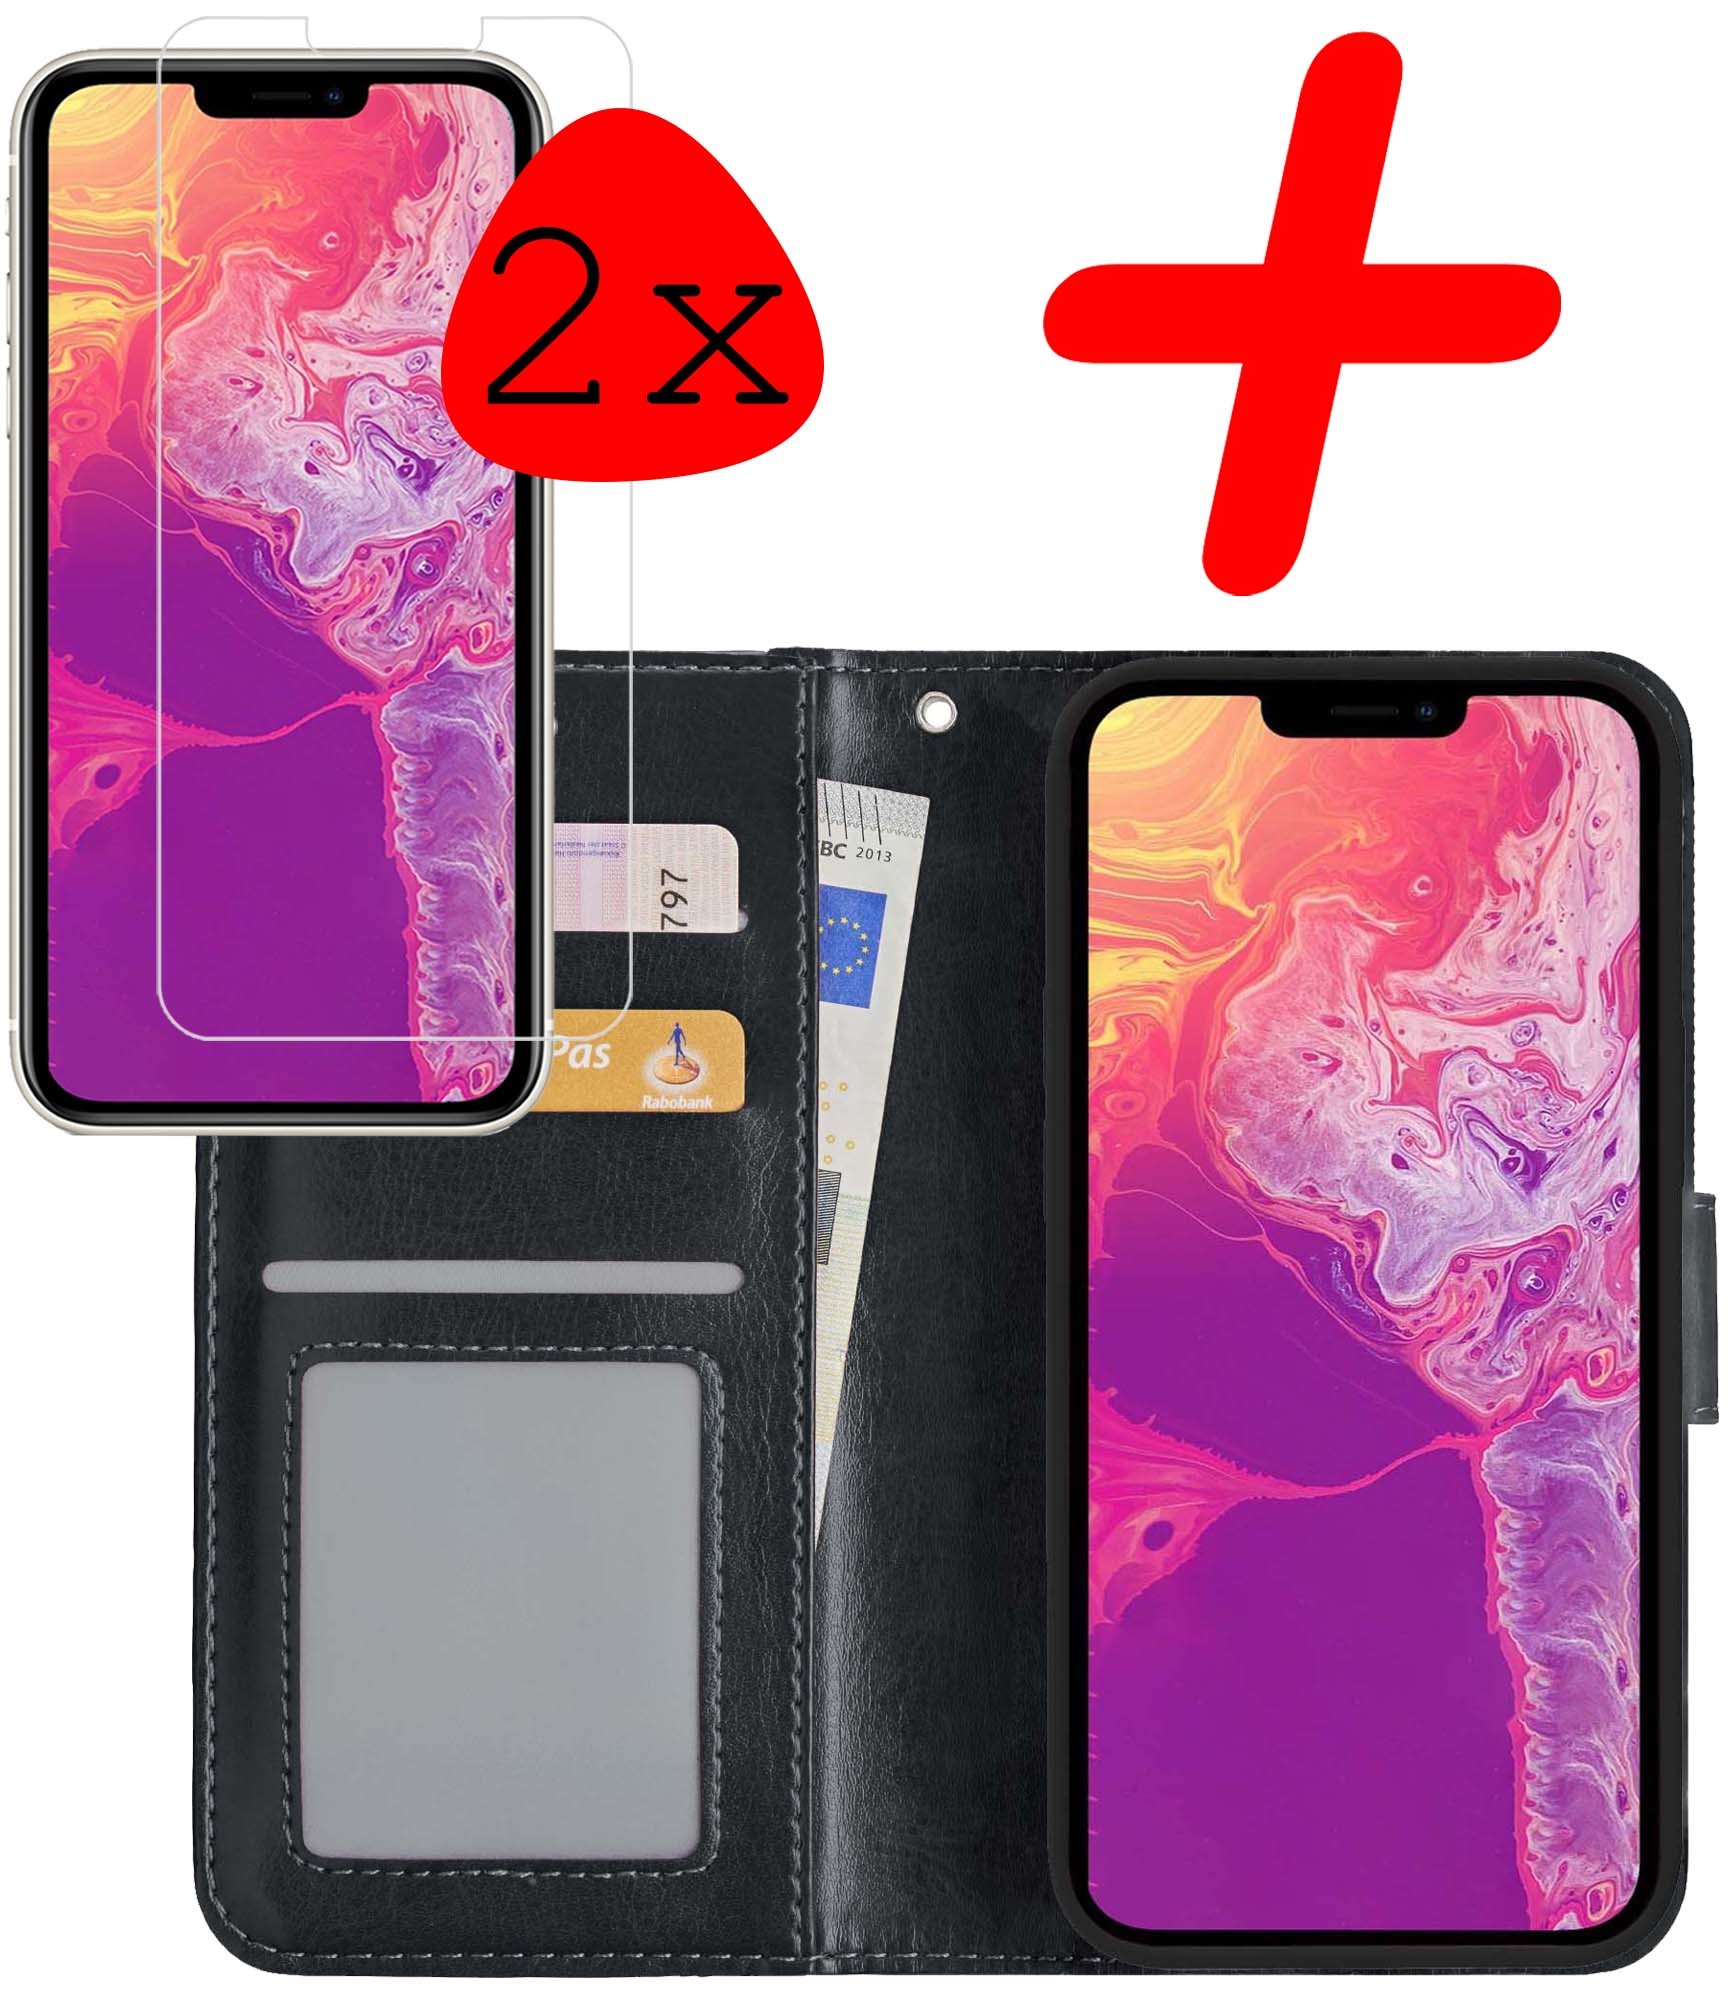 BASEY. iPhone 13 Pro Max Hoesje Bookcase 2x Screenprotector - iPhone 13 Pro Max Case Hoes Cover - iPhone 13 Pro Max Screenprotector 2x - Zwart